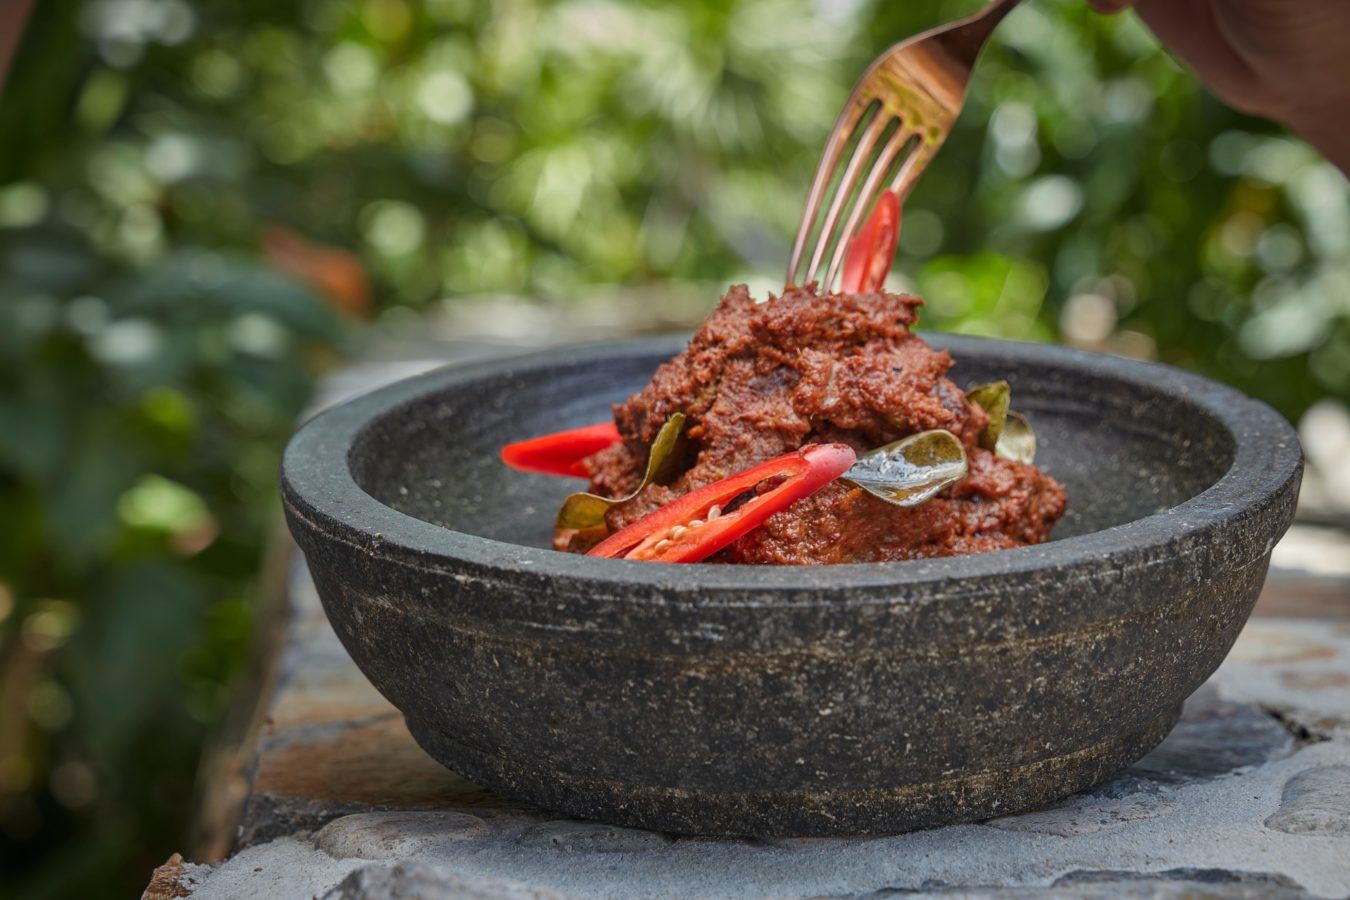 6 best places to satisfy your rendang cravings in Singapore